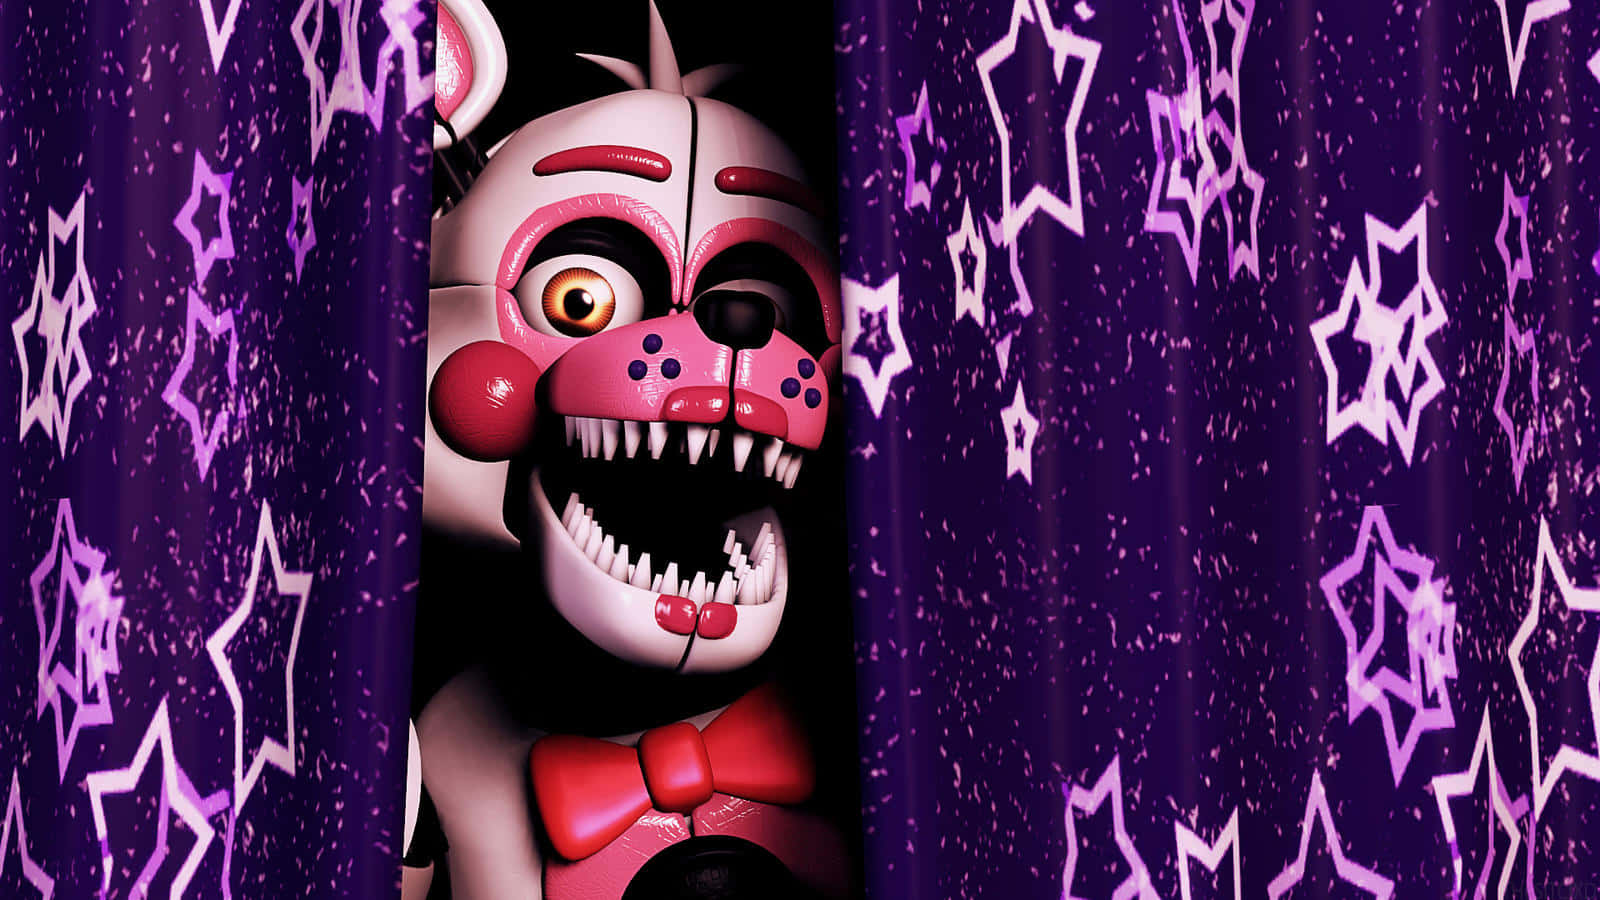 Funtime Foxy Wallpaper: Dance with Foxy Wallpaper